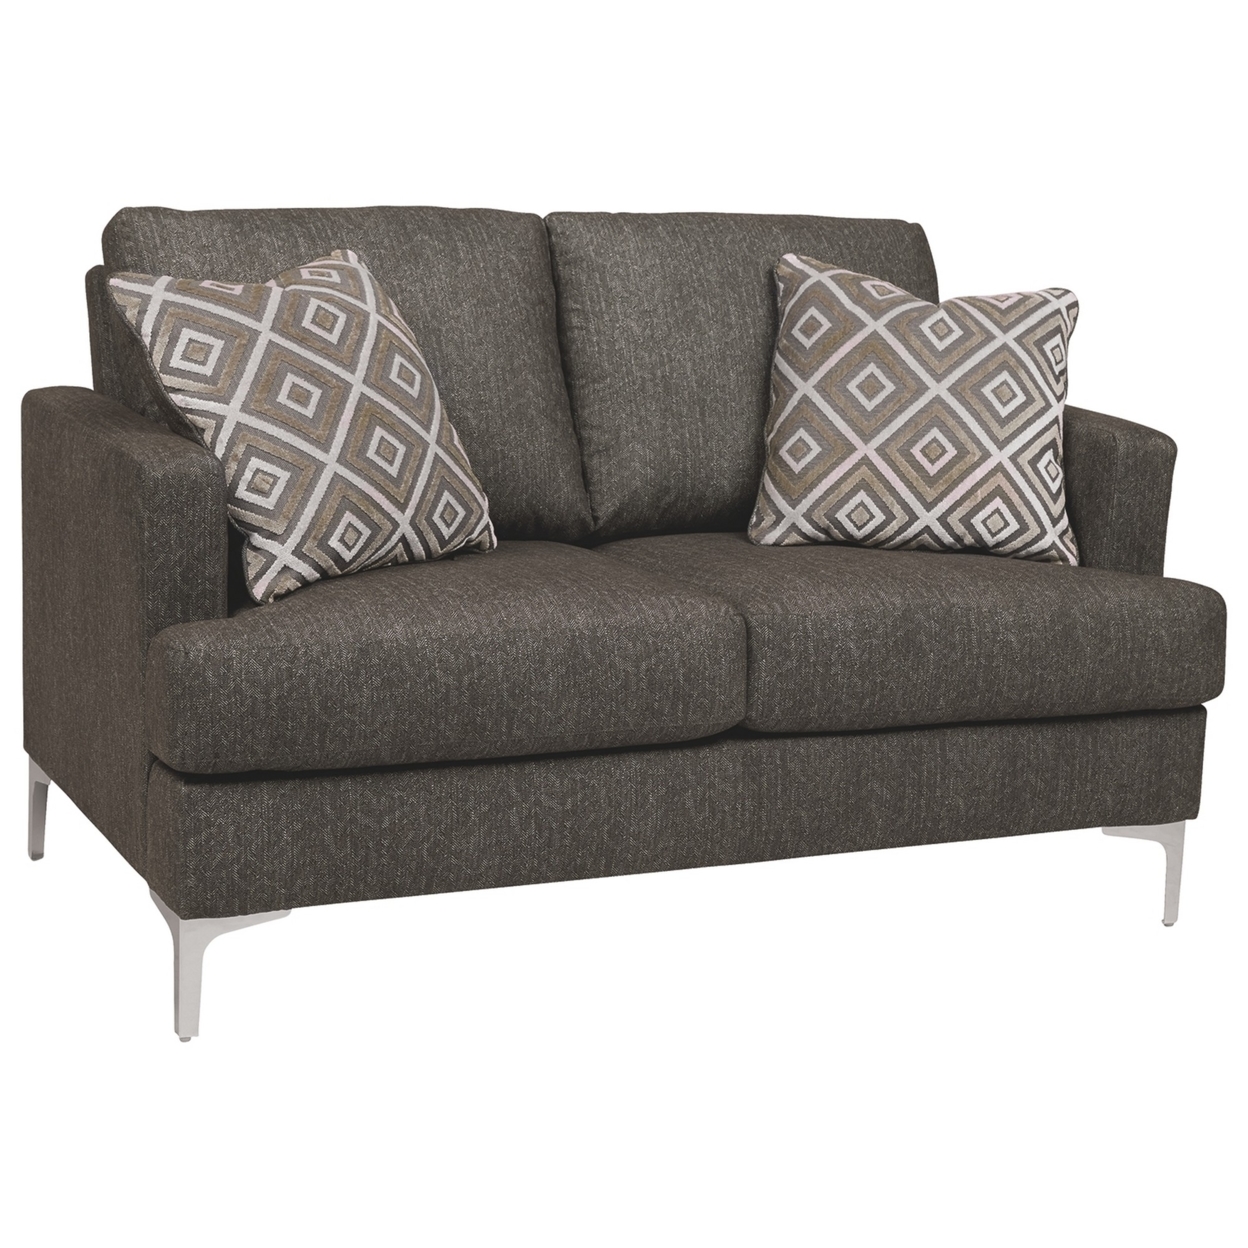 Fabric Upholstered Loveseat With Metal Bracket Legs And Track Armrests,Gray- Saltoro Sherpi